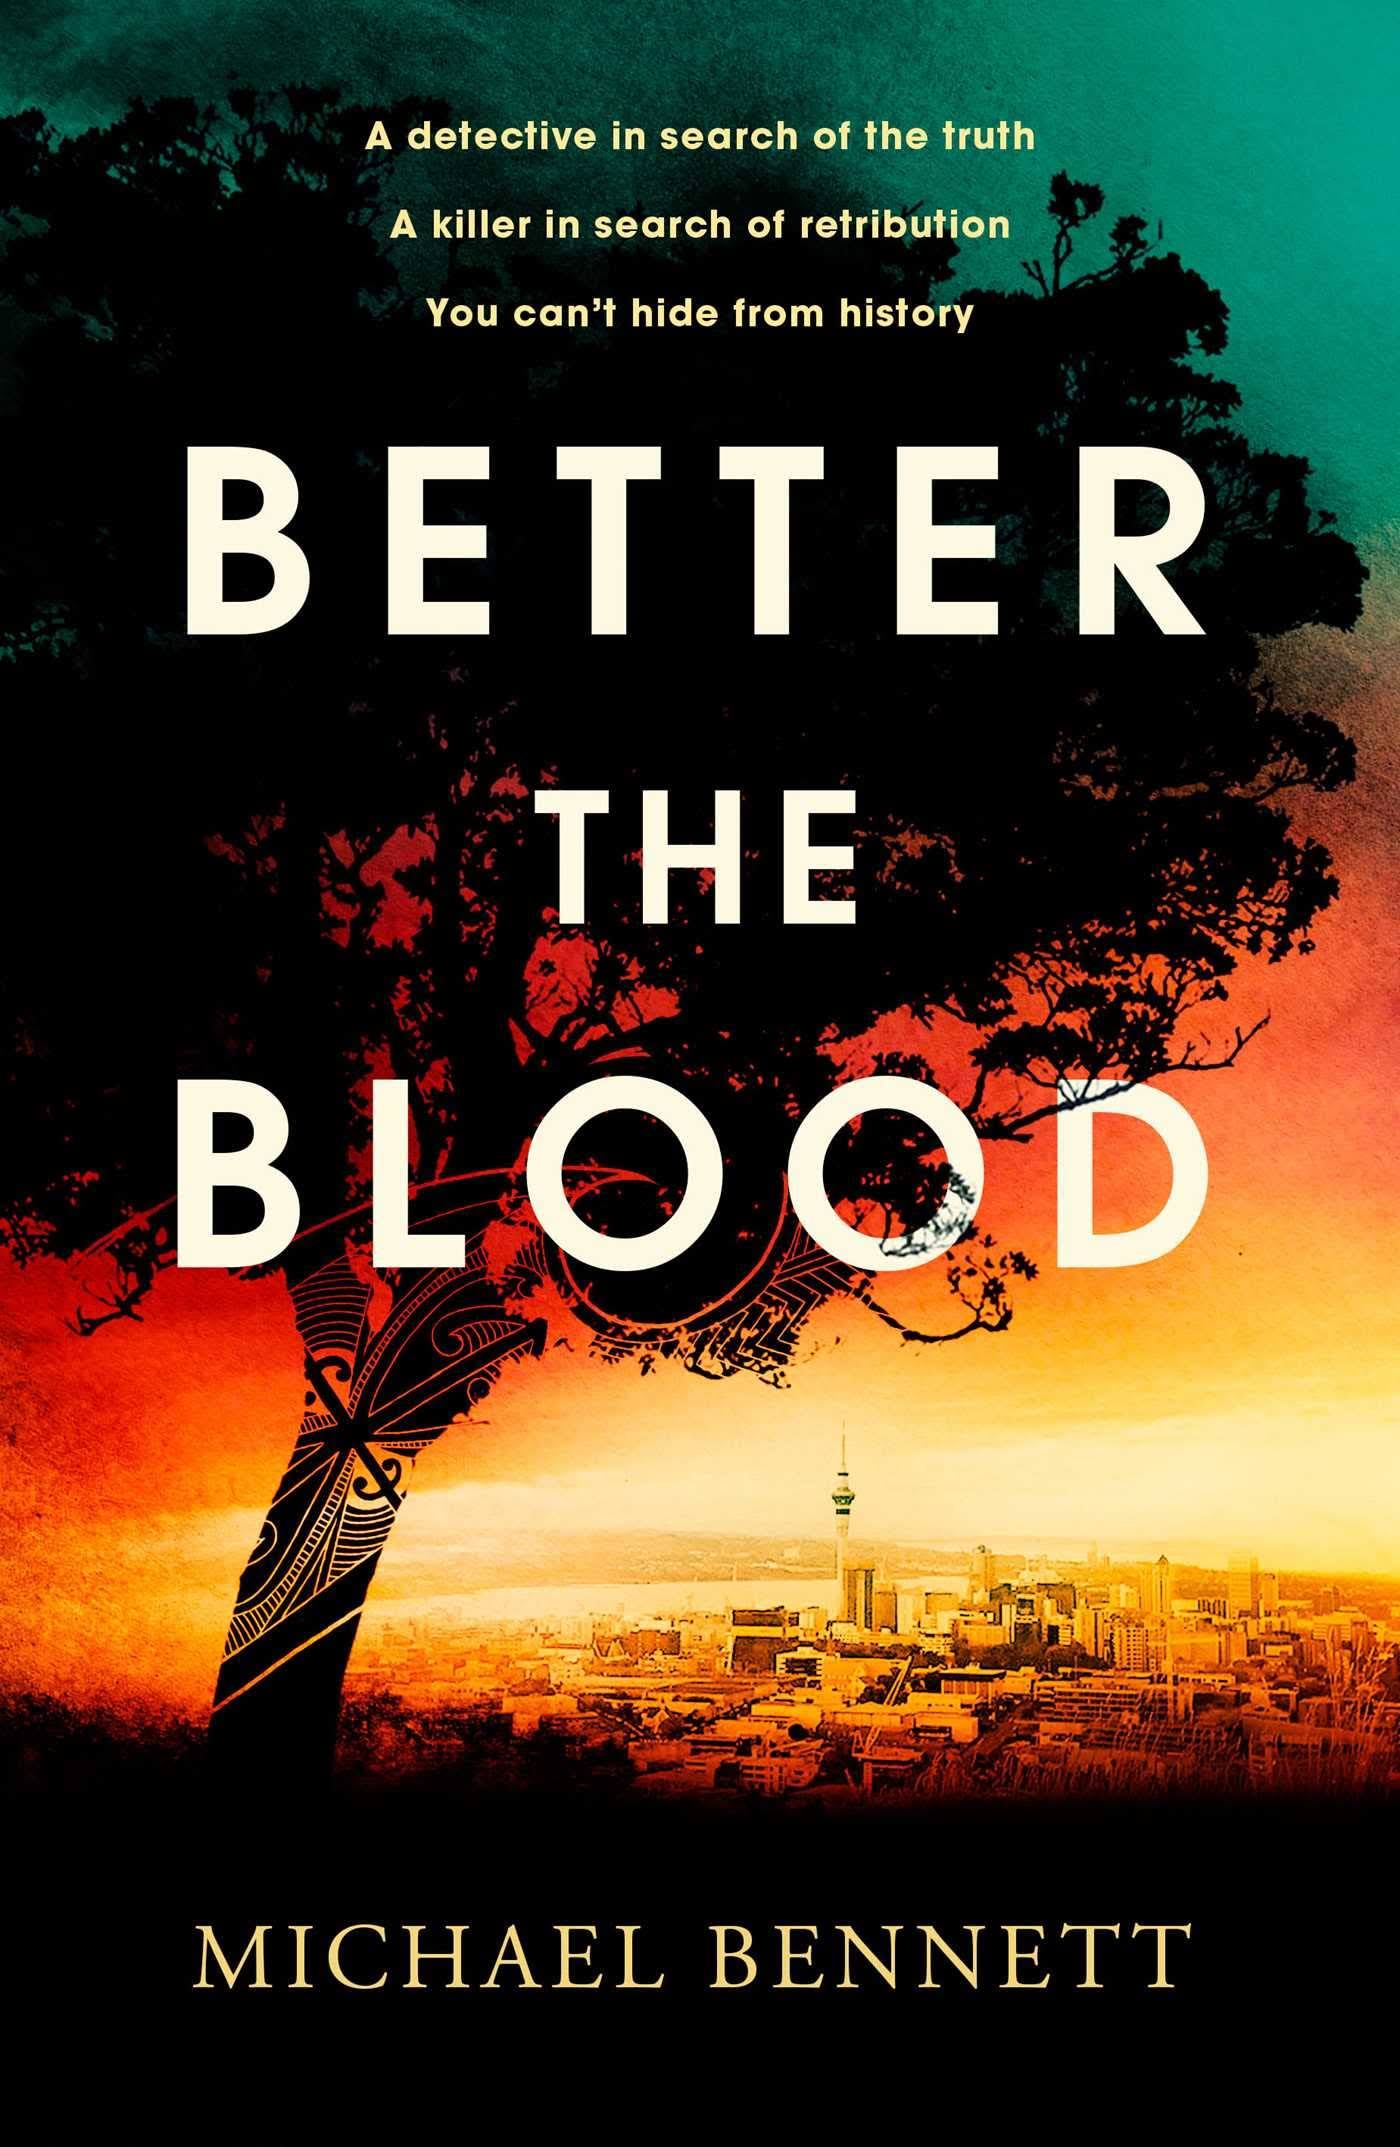 Better the Blood [Book]